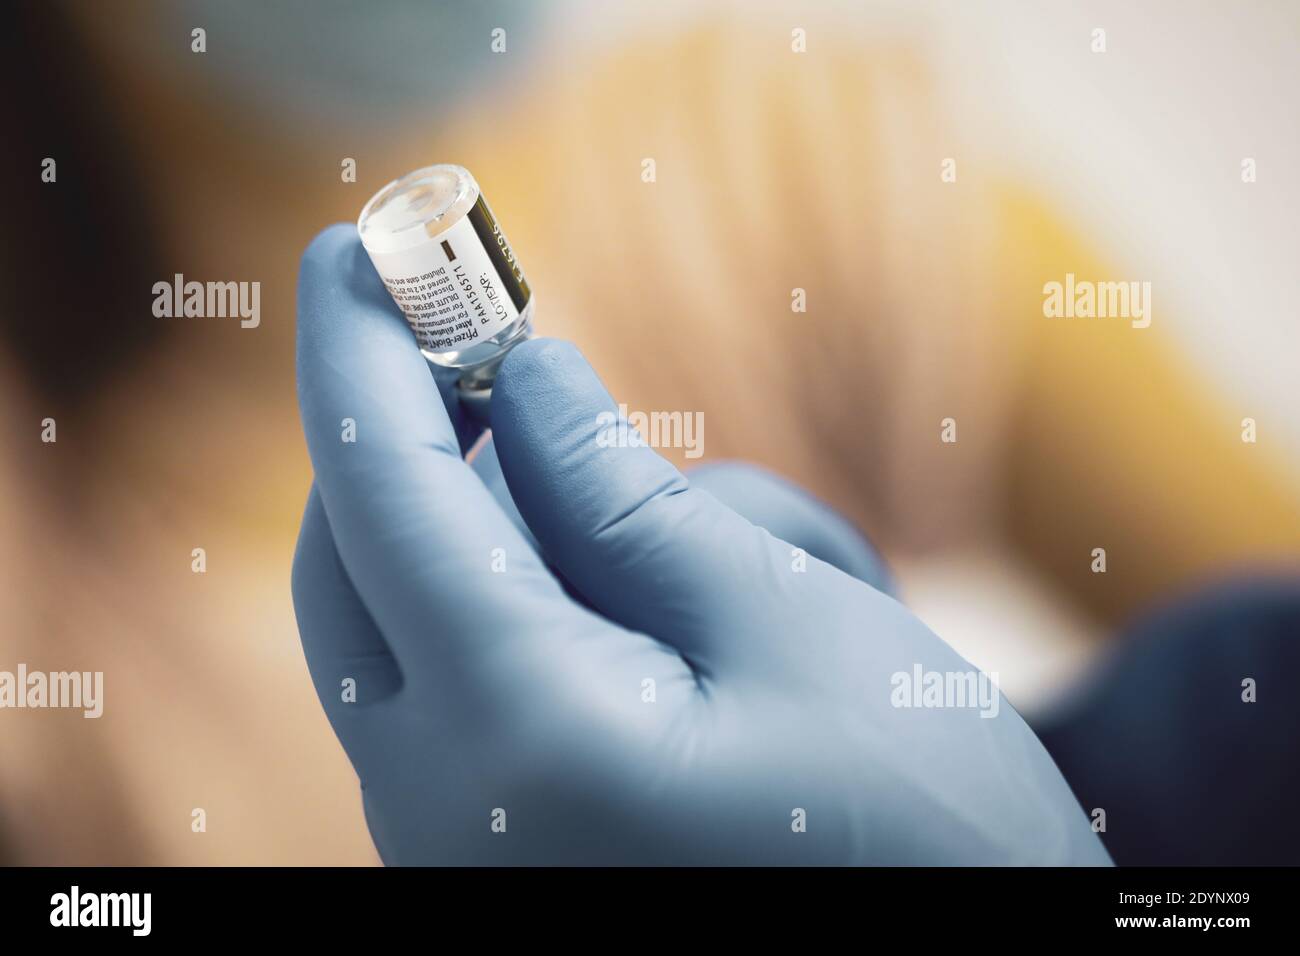 Bucharest, Romania - December 27, 2020: Shallow depth of field (selective focus) image with details of the Pfizer BioNTech vaccine in the hospital dur Stock Photo